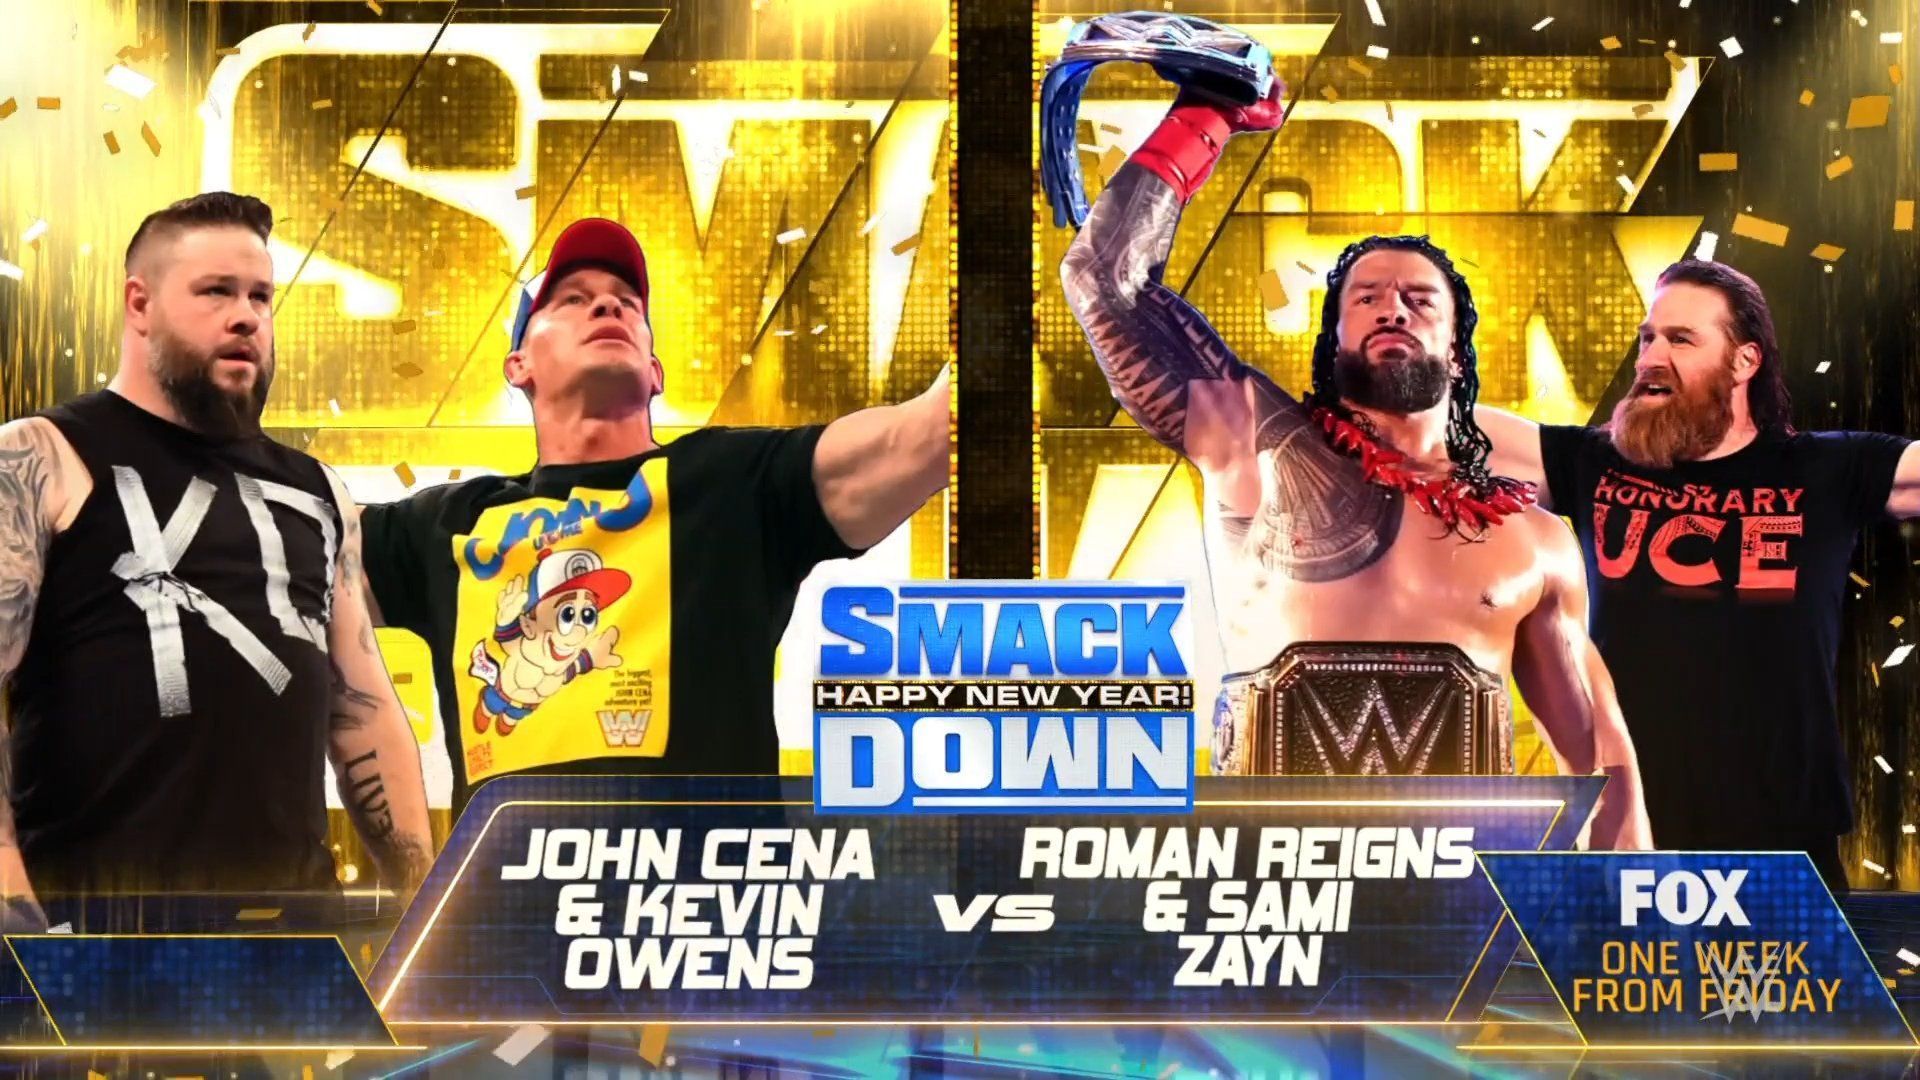 John Cena will take part in a mega main event match this Friday!